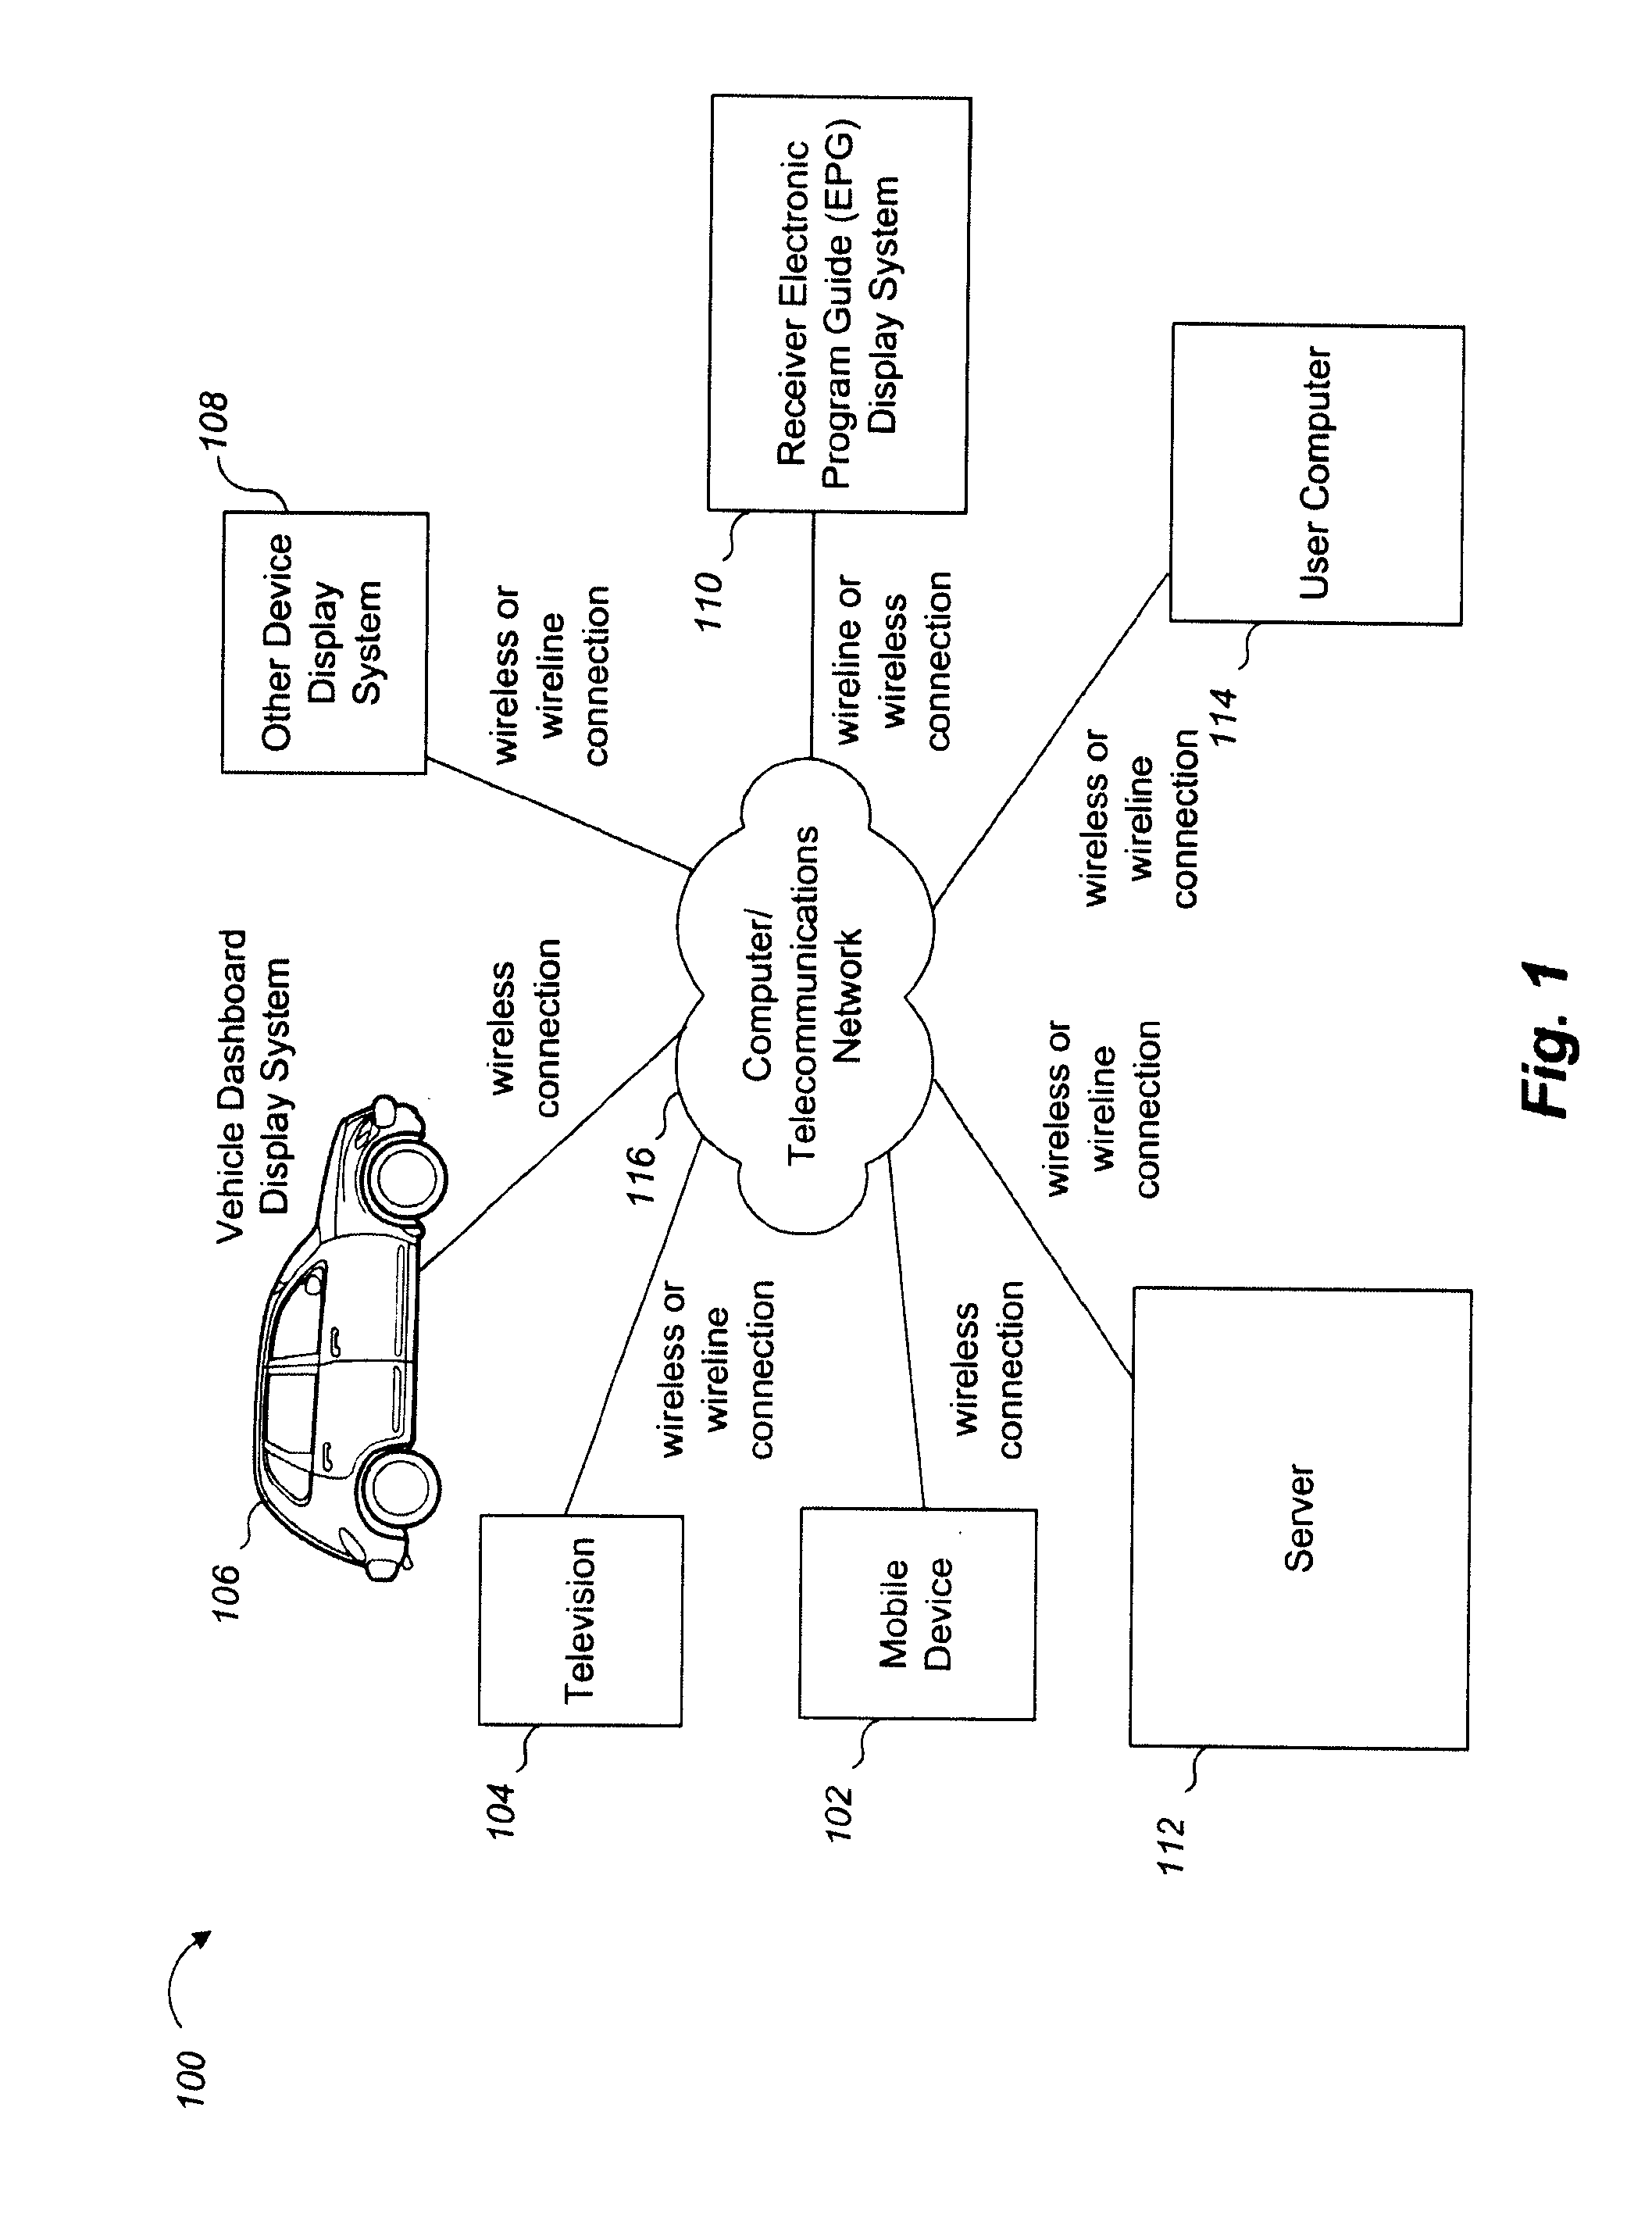 Systems, devices and methods for font size selection